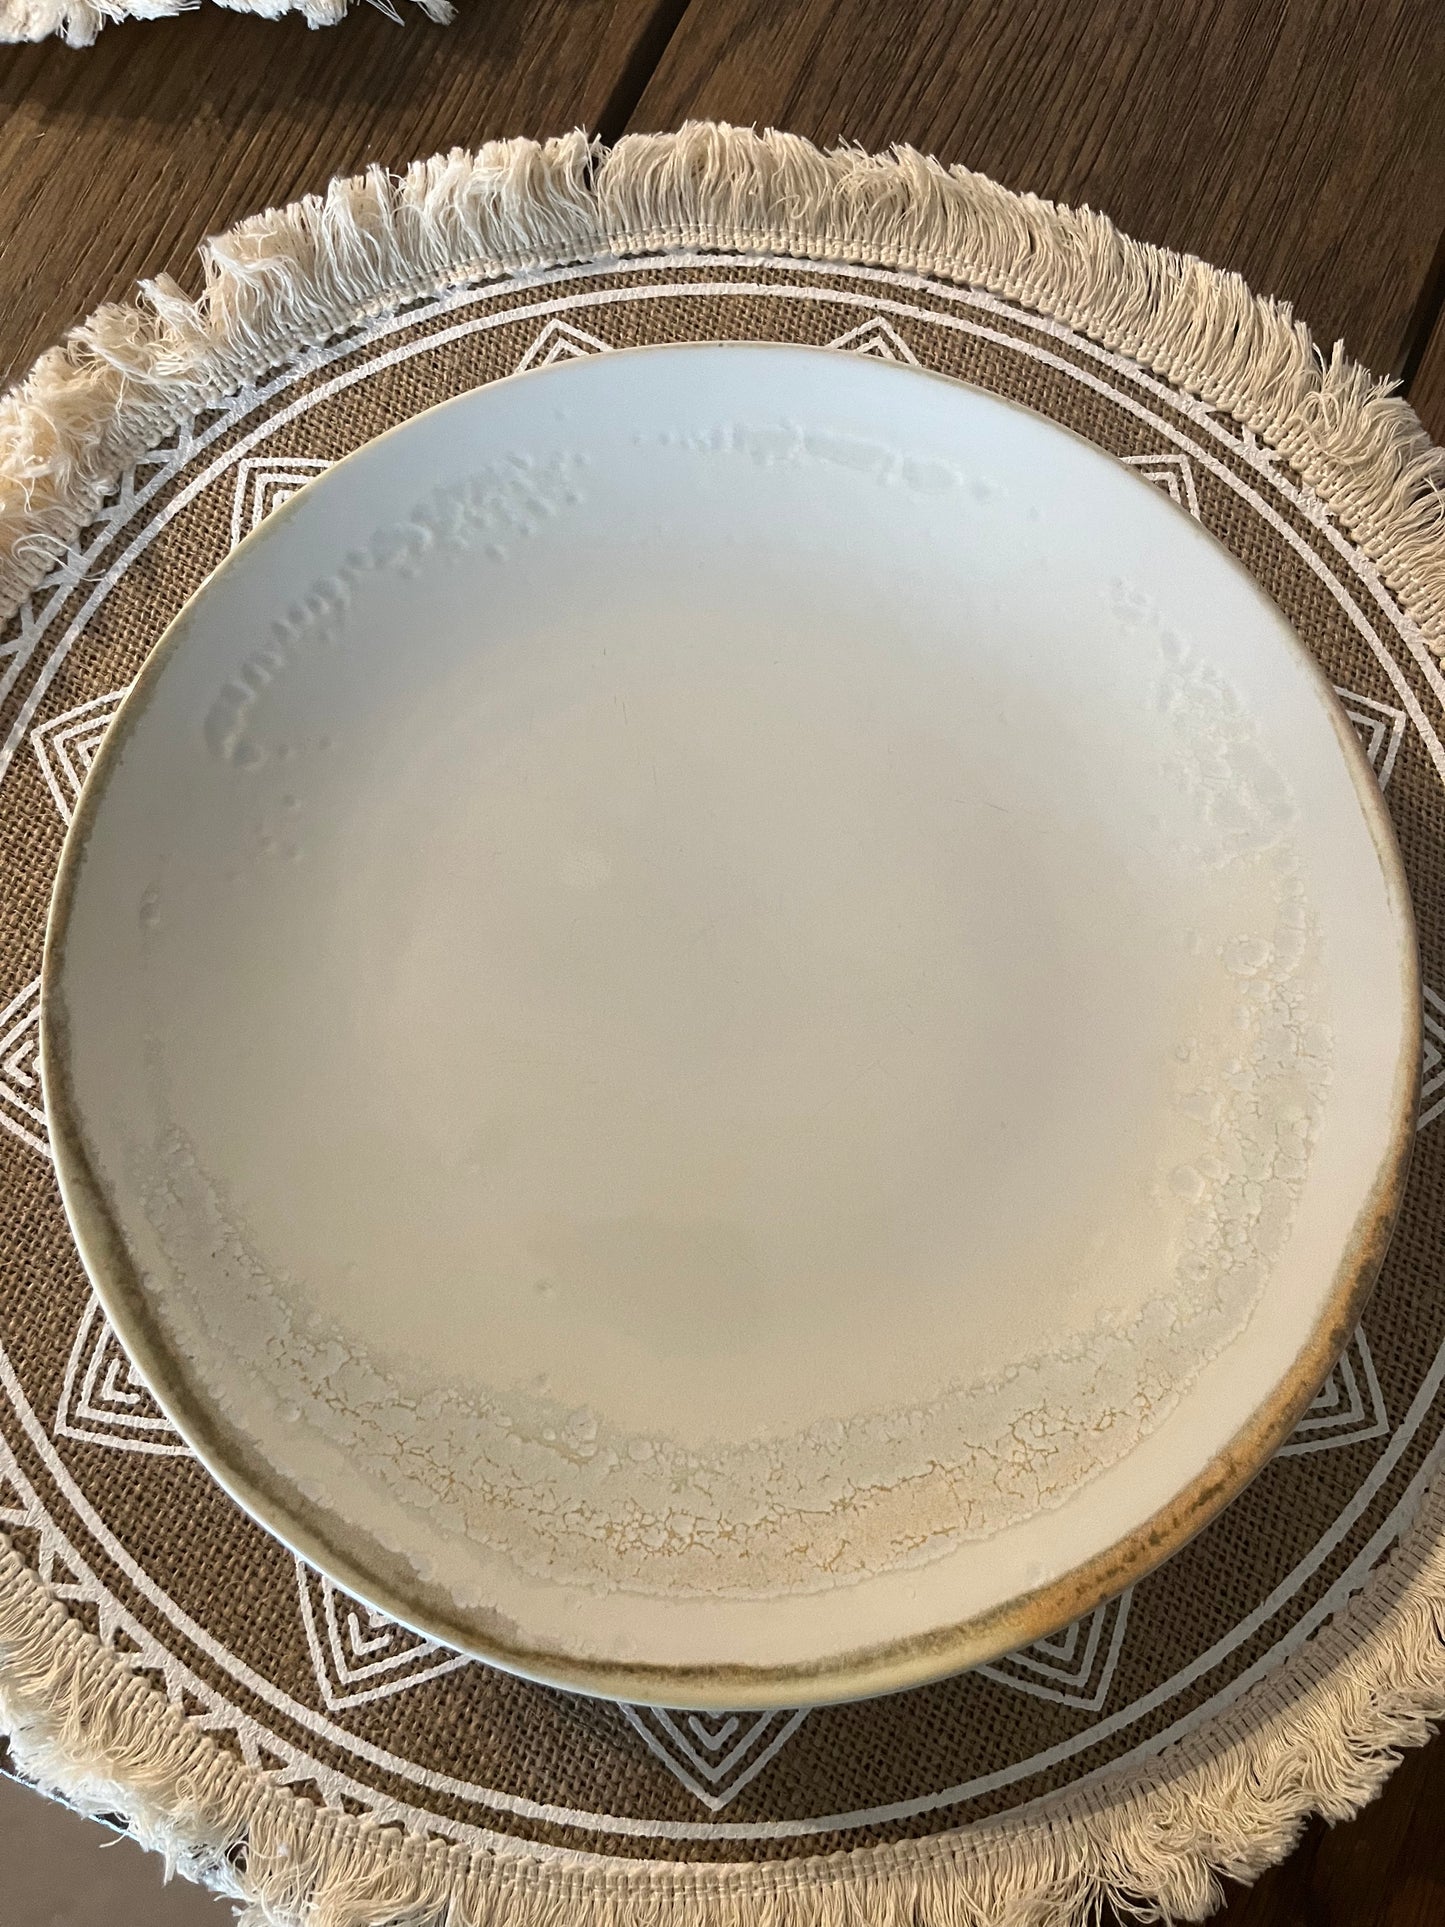 Boho plate placement